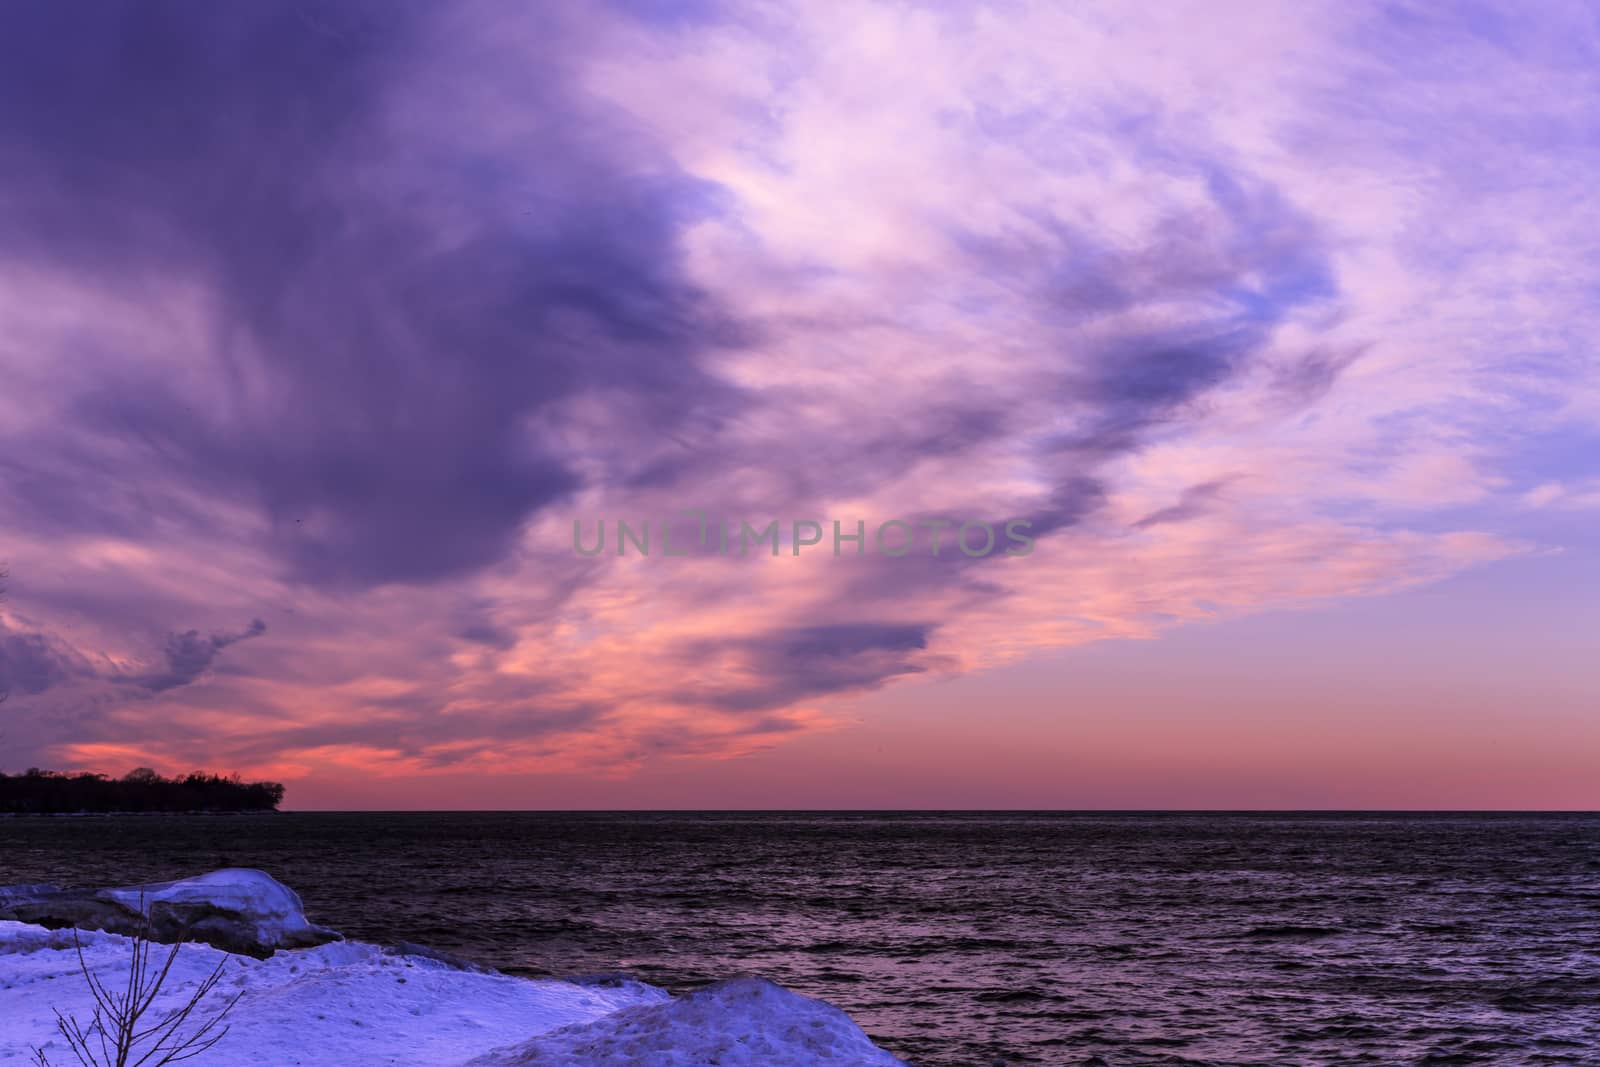 Lake with frozen shoreline and beautiful pink sunset with wispy purple hued clouds.